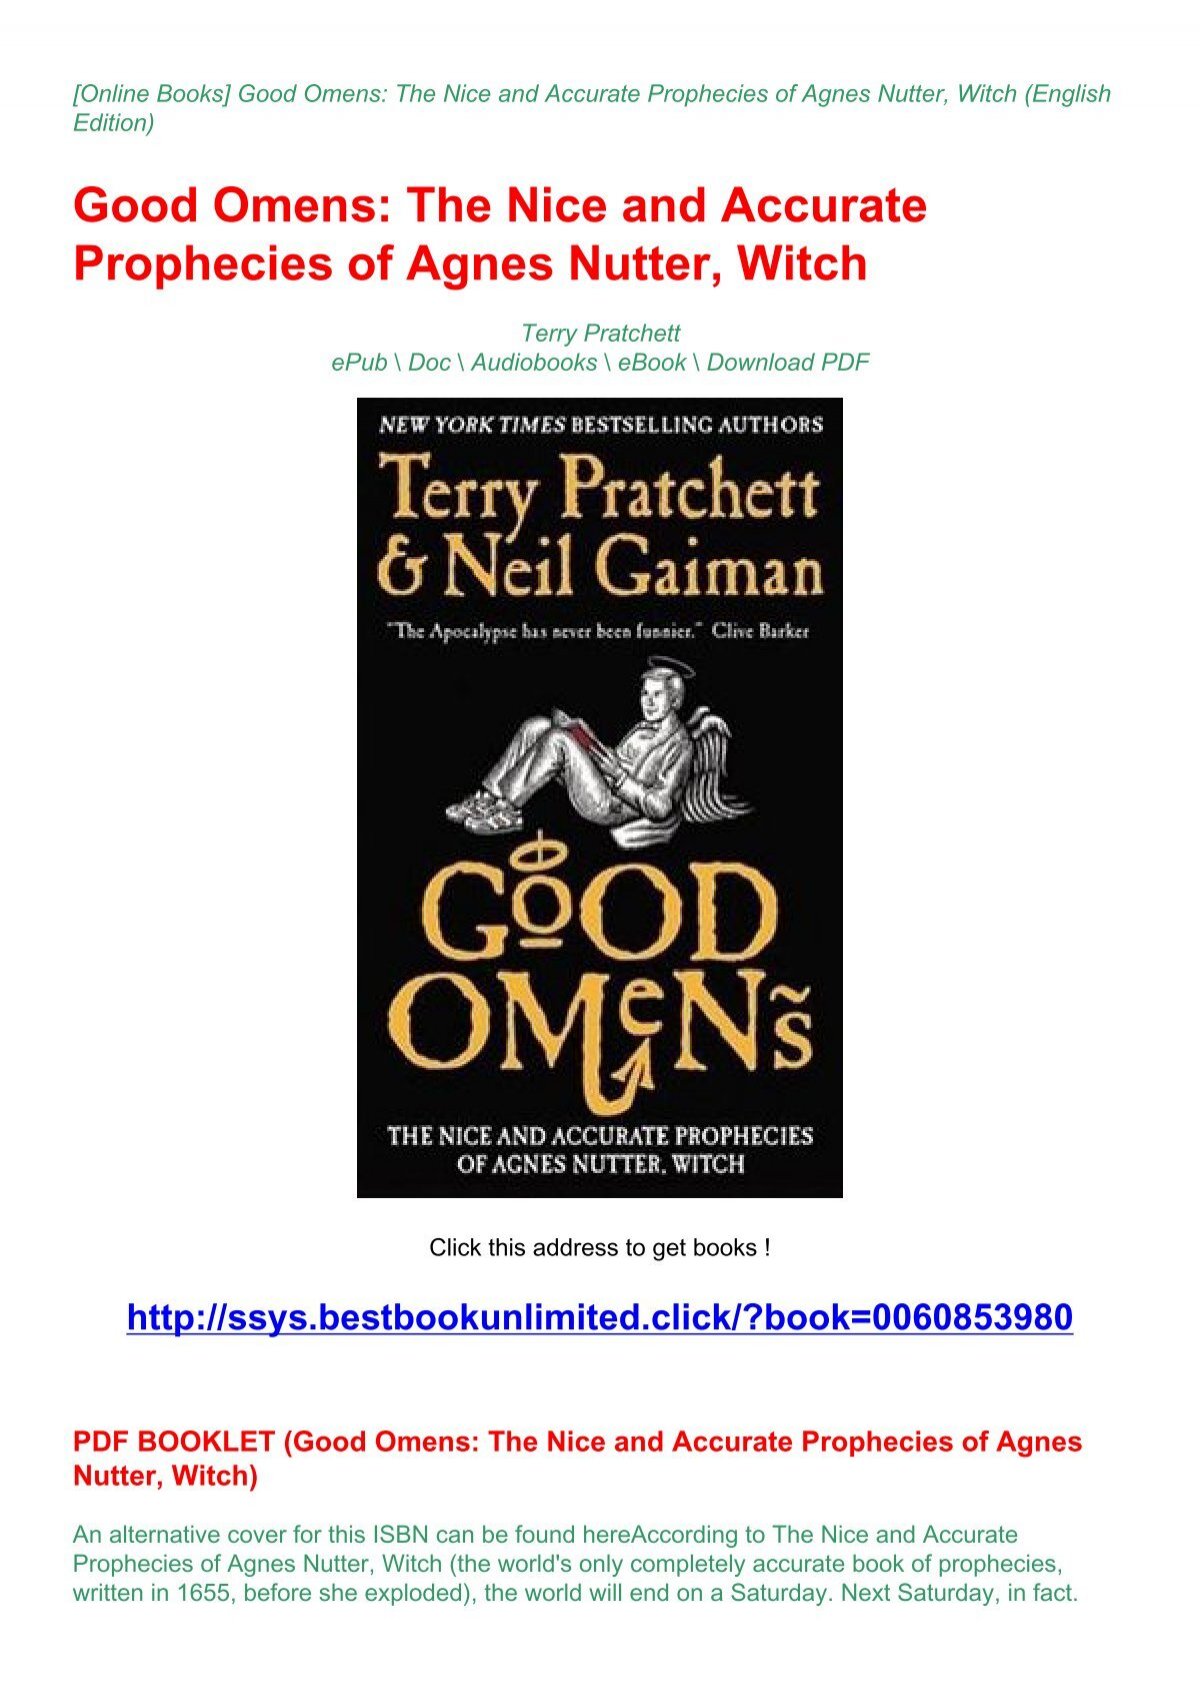 Good Omens: The Nice and Accurate Prophecies of Agnes Nutter, Witch by  Terry Pratchett